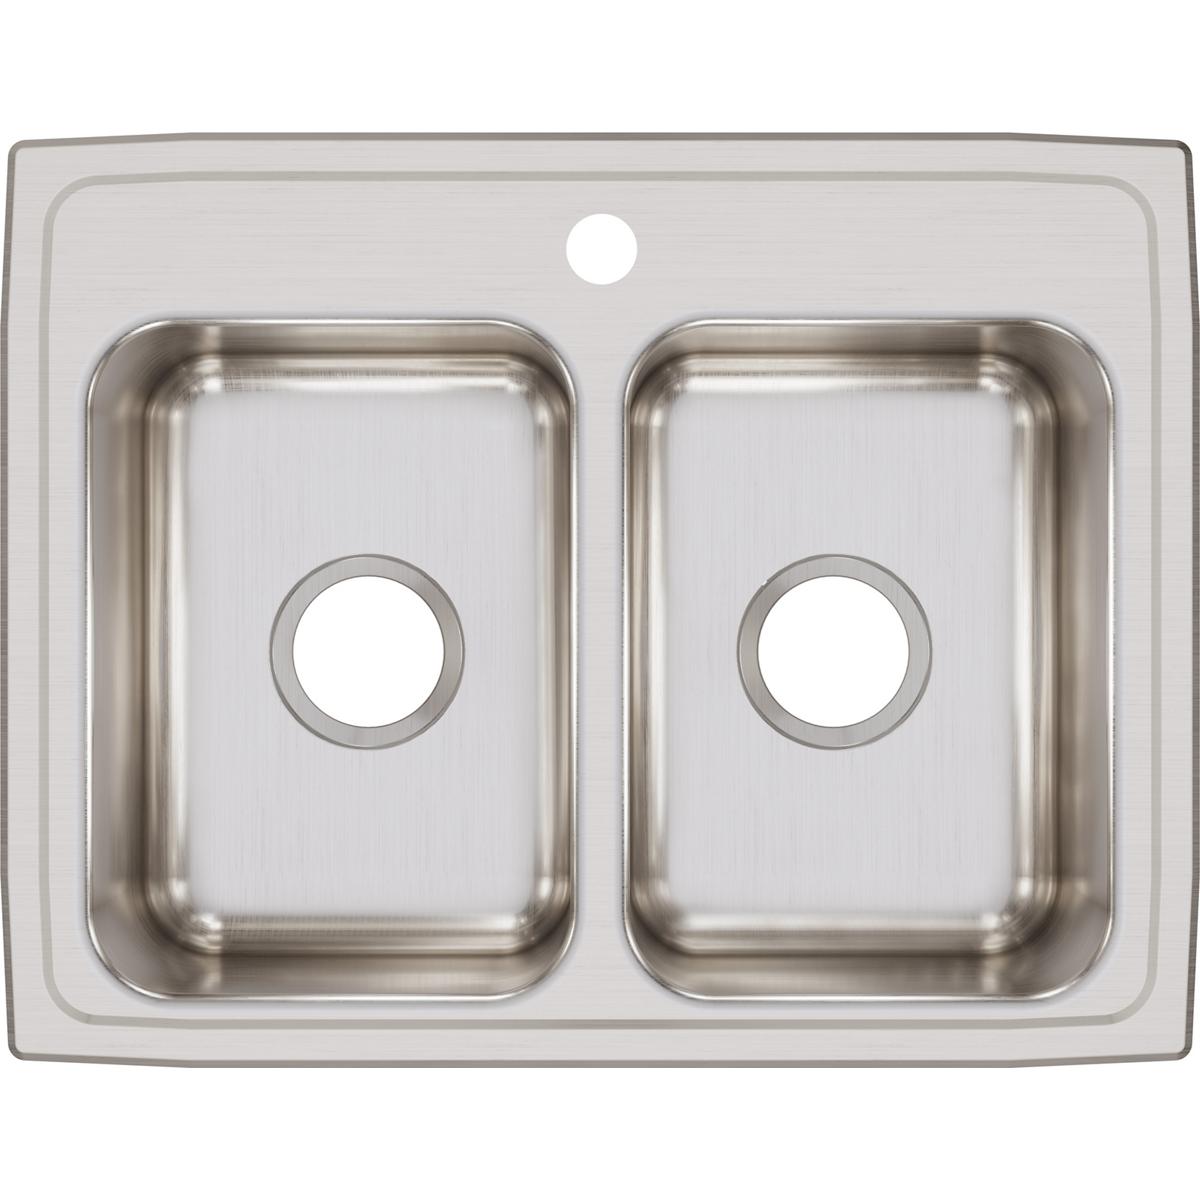 Elkay Lustertone Classic Stainless Steel 25" x 19-1/2" x 7-5/8" Equal Double Bowl Drop-in Sink